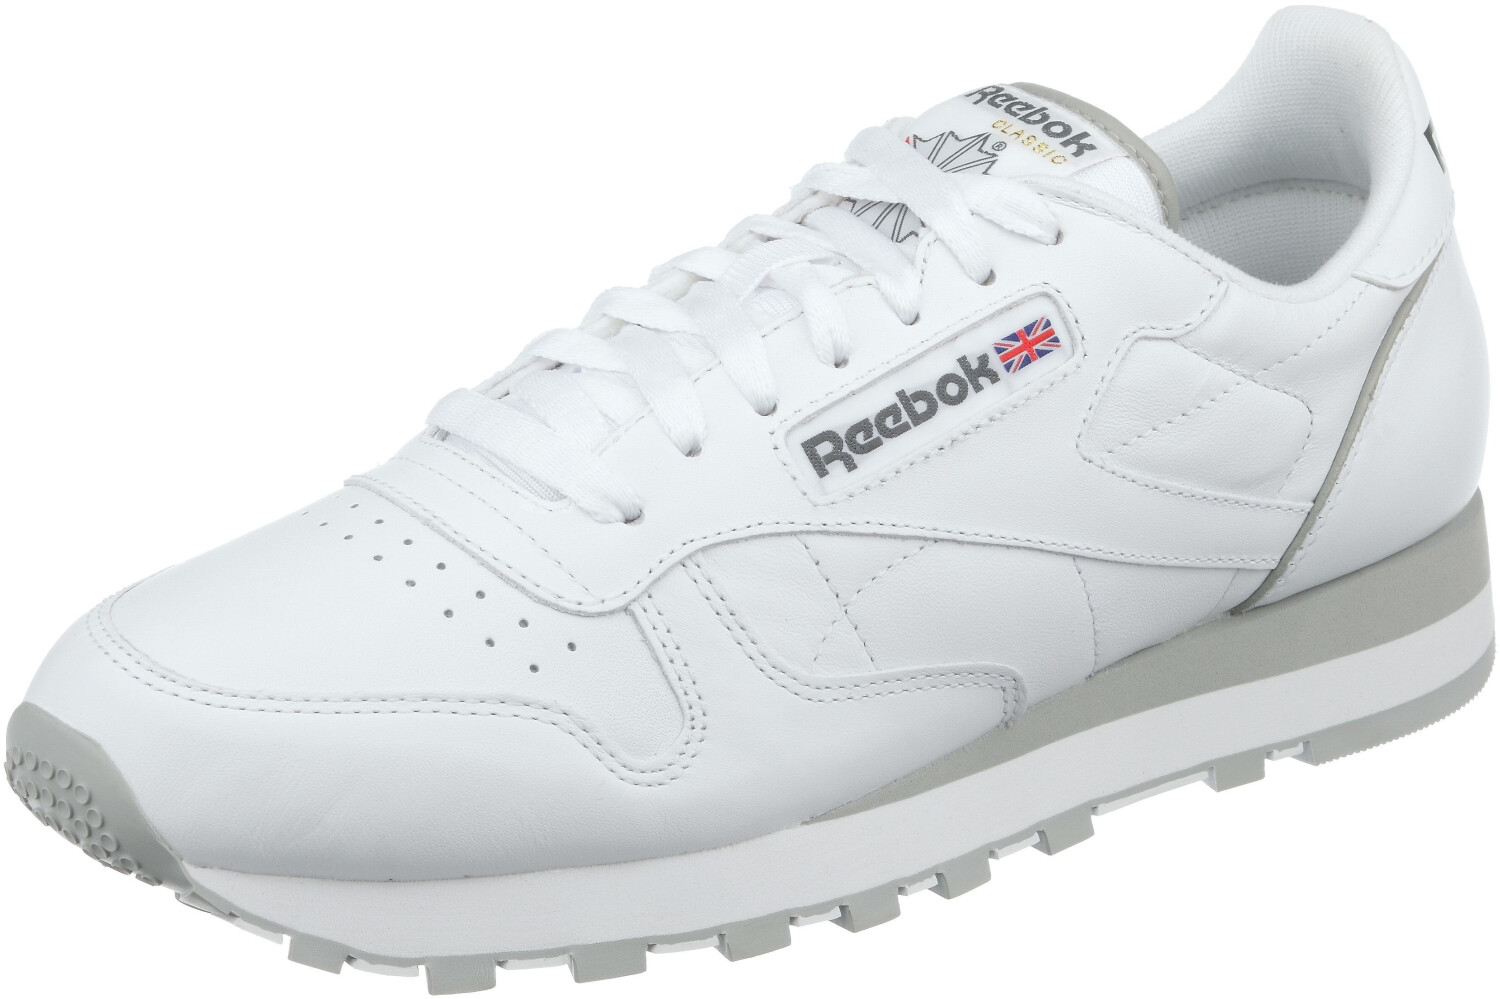 Buy Reebok Classic Leather white/lt grey from £99.99 (Today) – Best ...